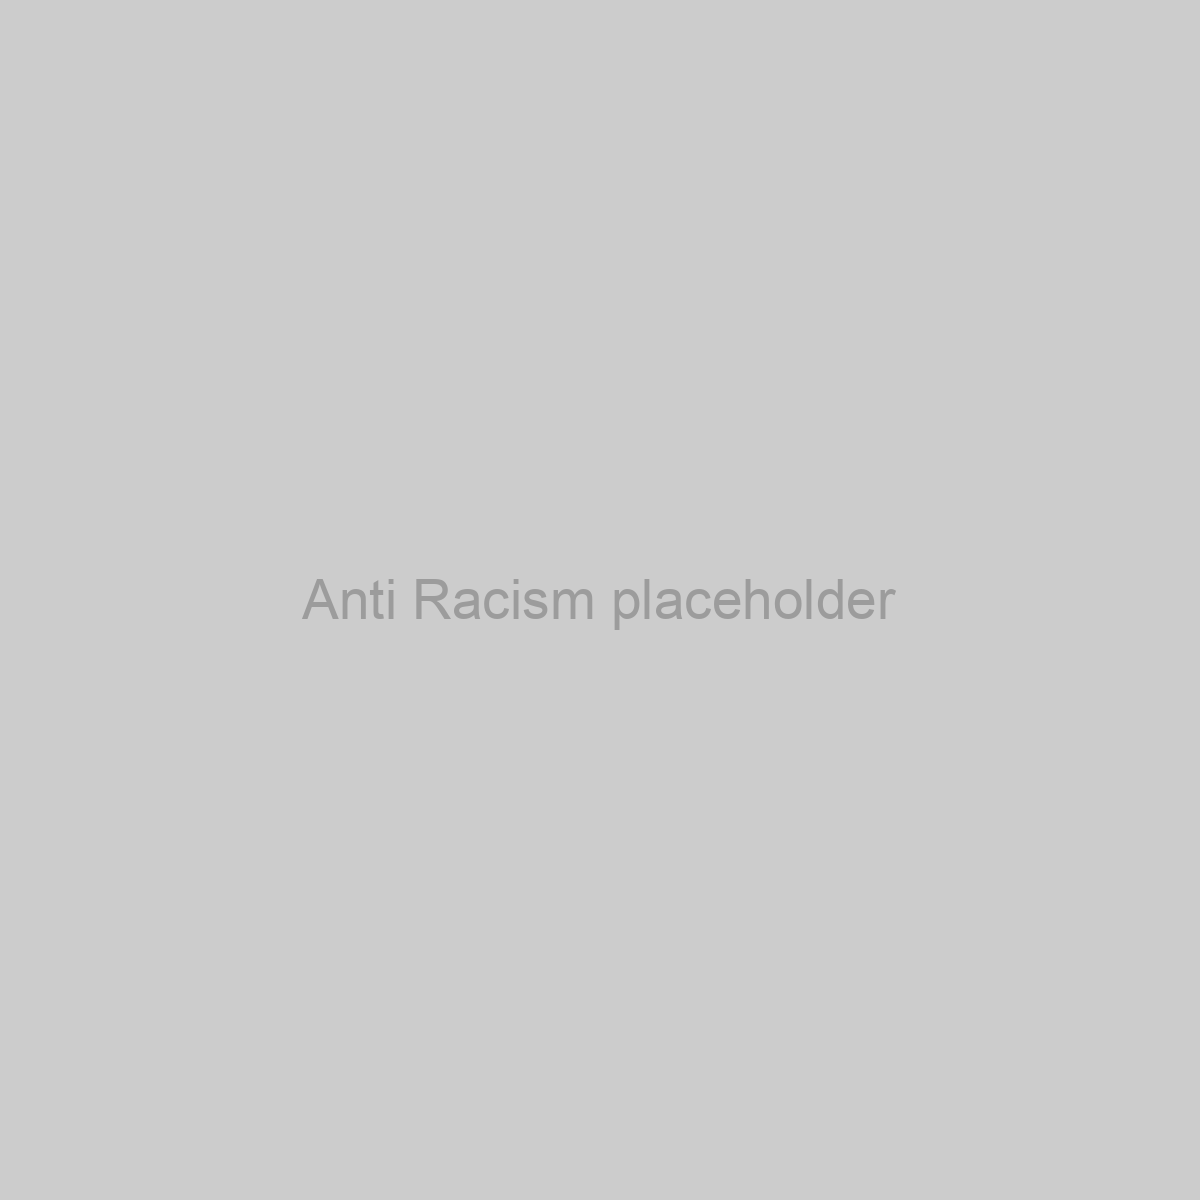 Anti Racism Placeholder Image